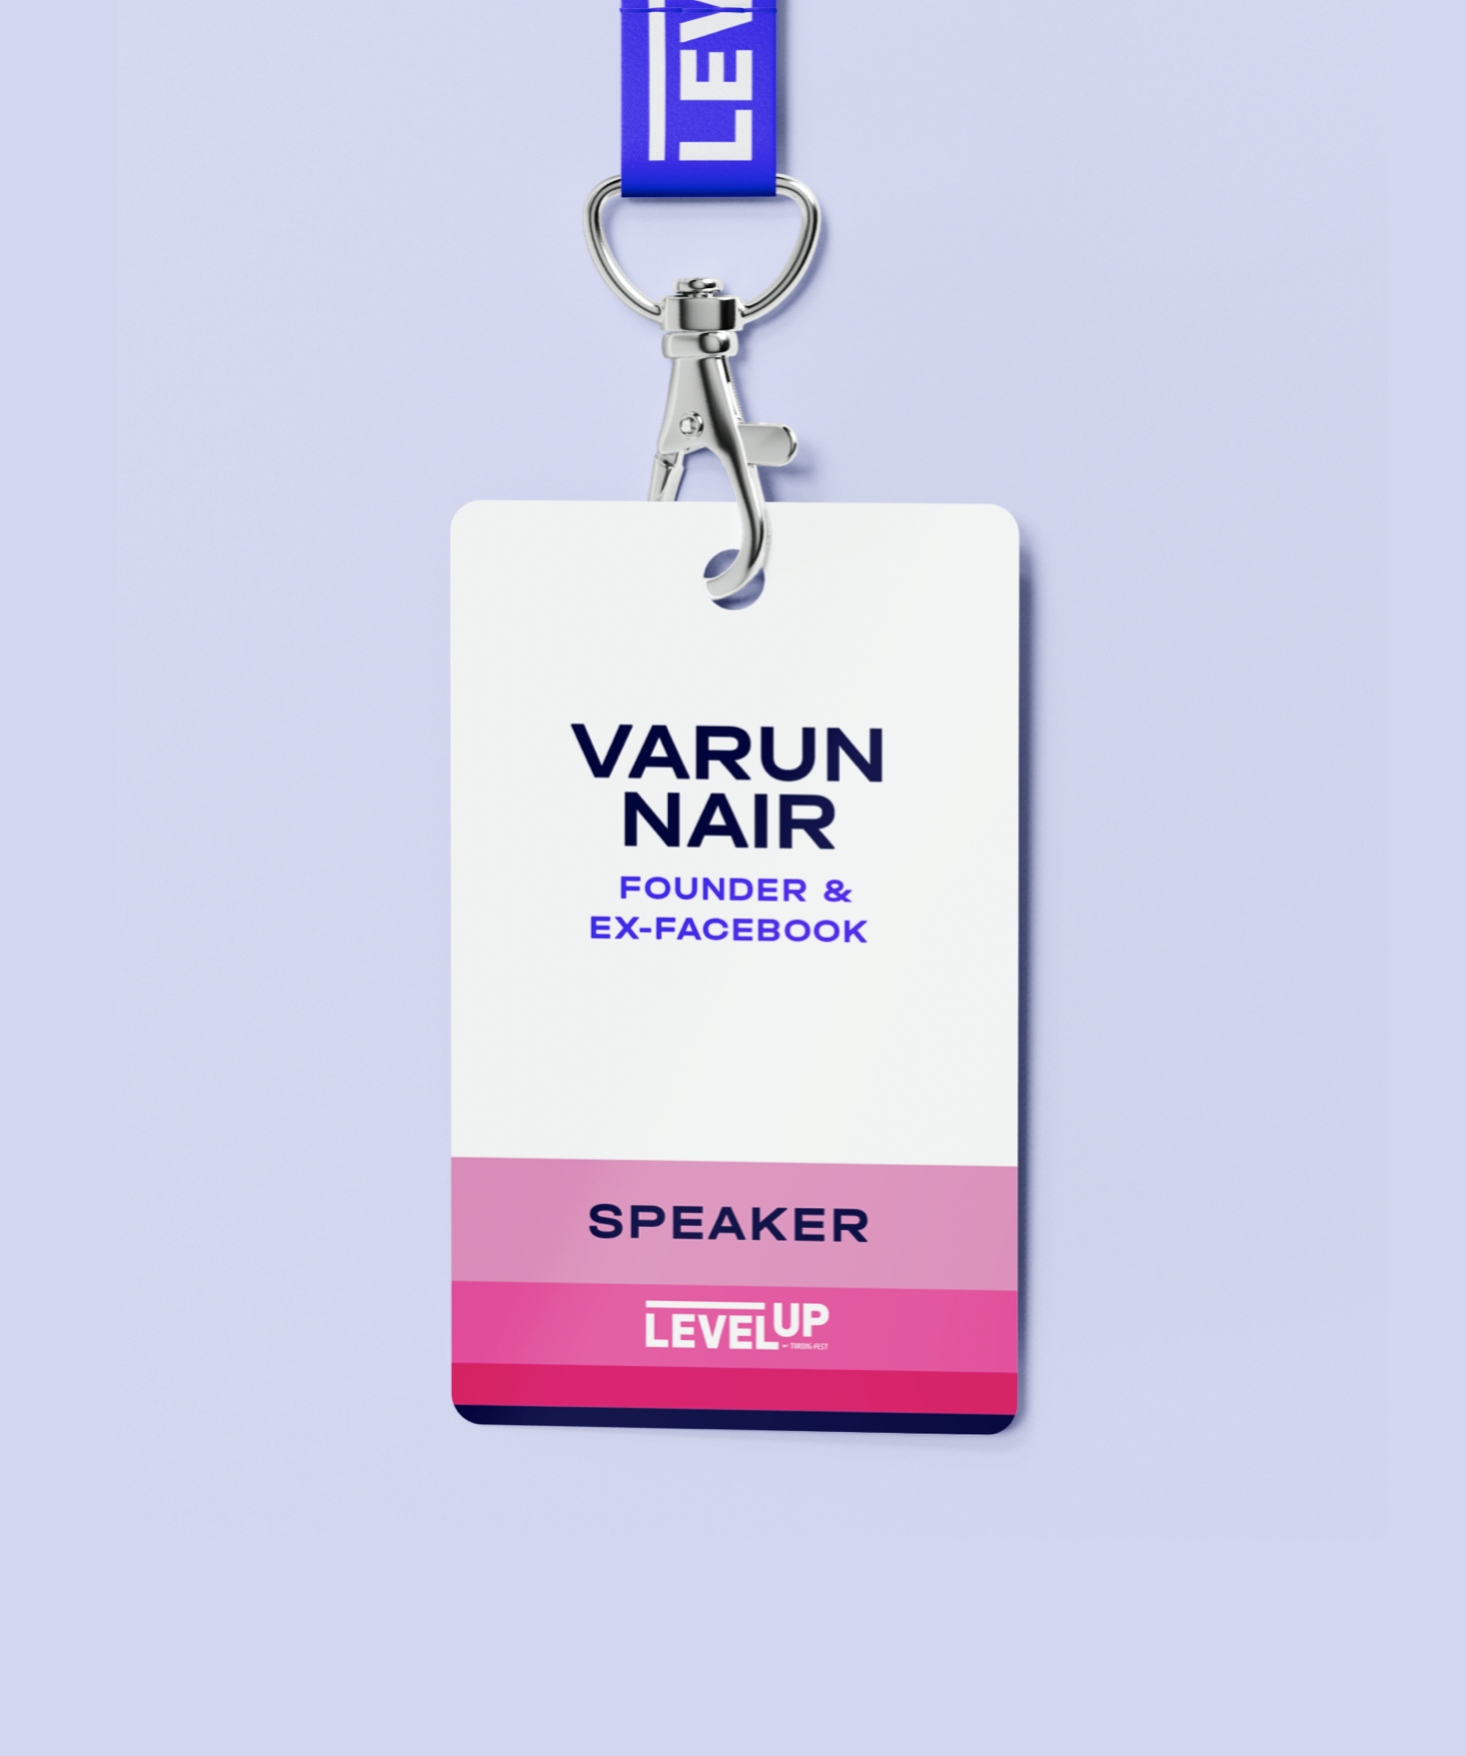 A ‘Level Up’ lanyard for a speaker